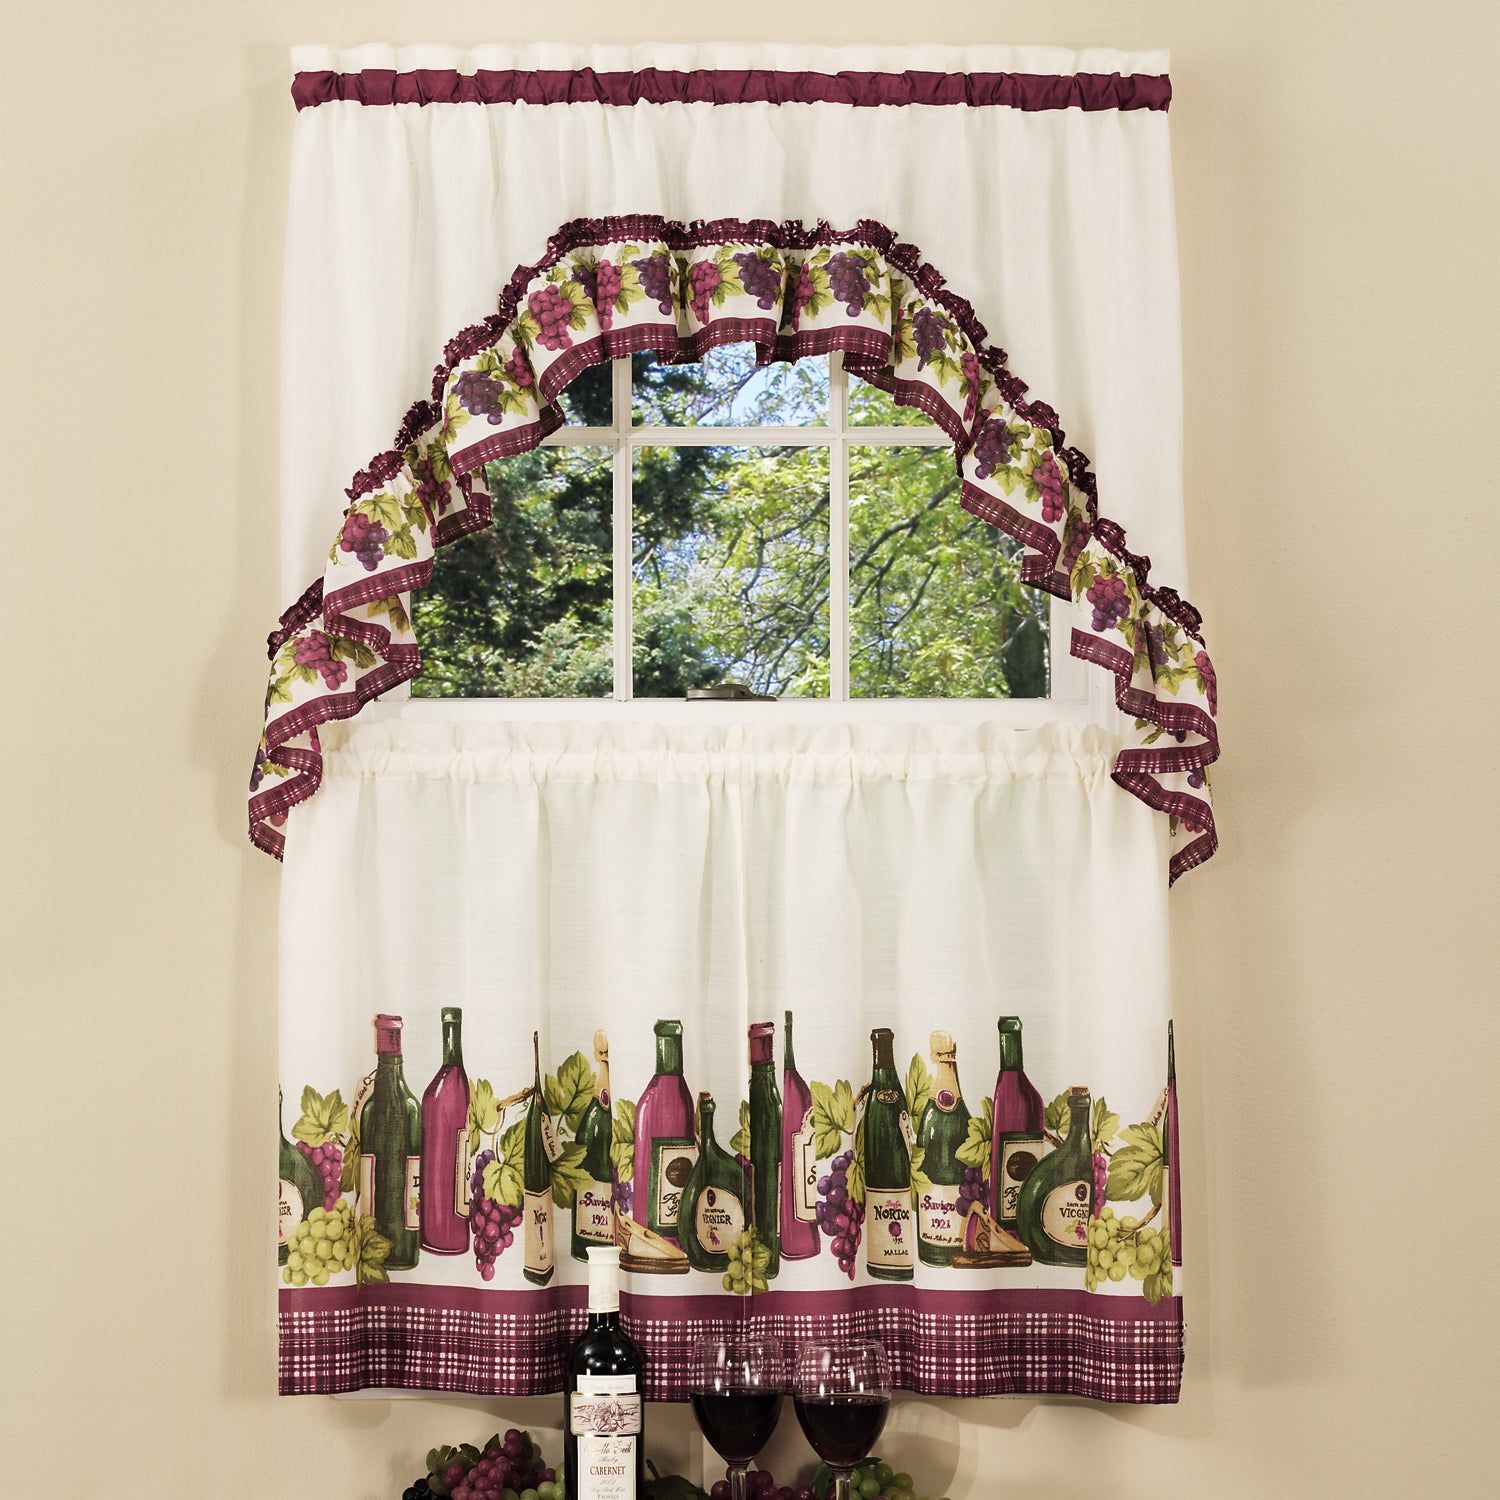 Traditional Two Piece Tailored Tier And Swag Window Curtains Set With  Classic French Wine And Grapes Print – 36 Inch Throughout Traditional Two Piece Tailored Tier And Valance Window Curtains (Photo 4 of 20)